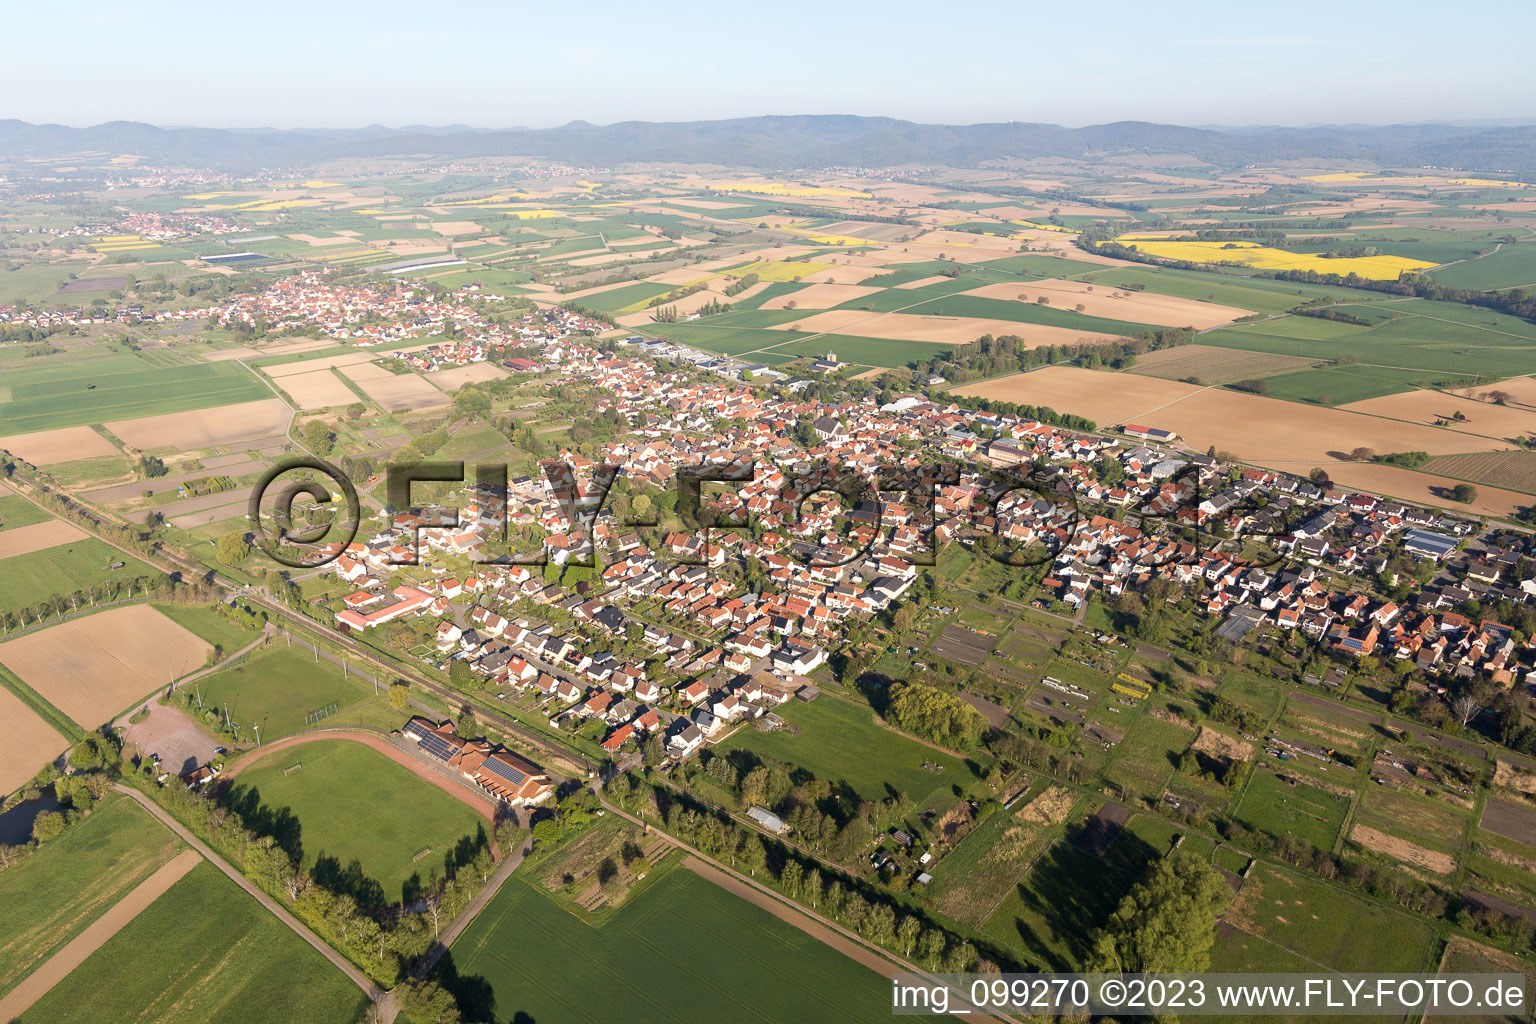 Steinfeld in the state Rhineland-Palatinate, Germany seen from a drone